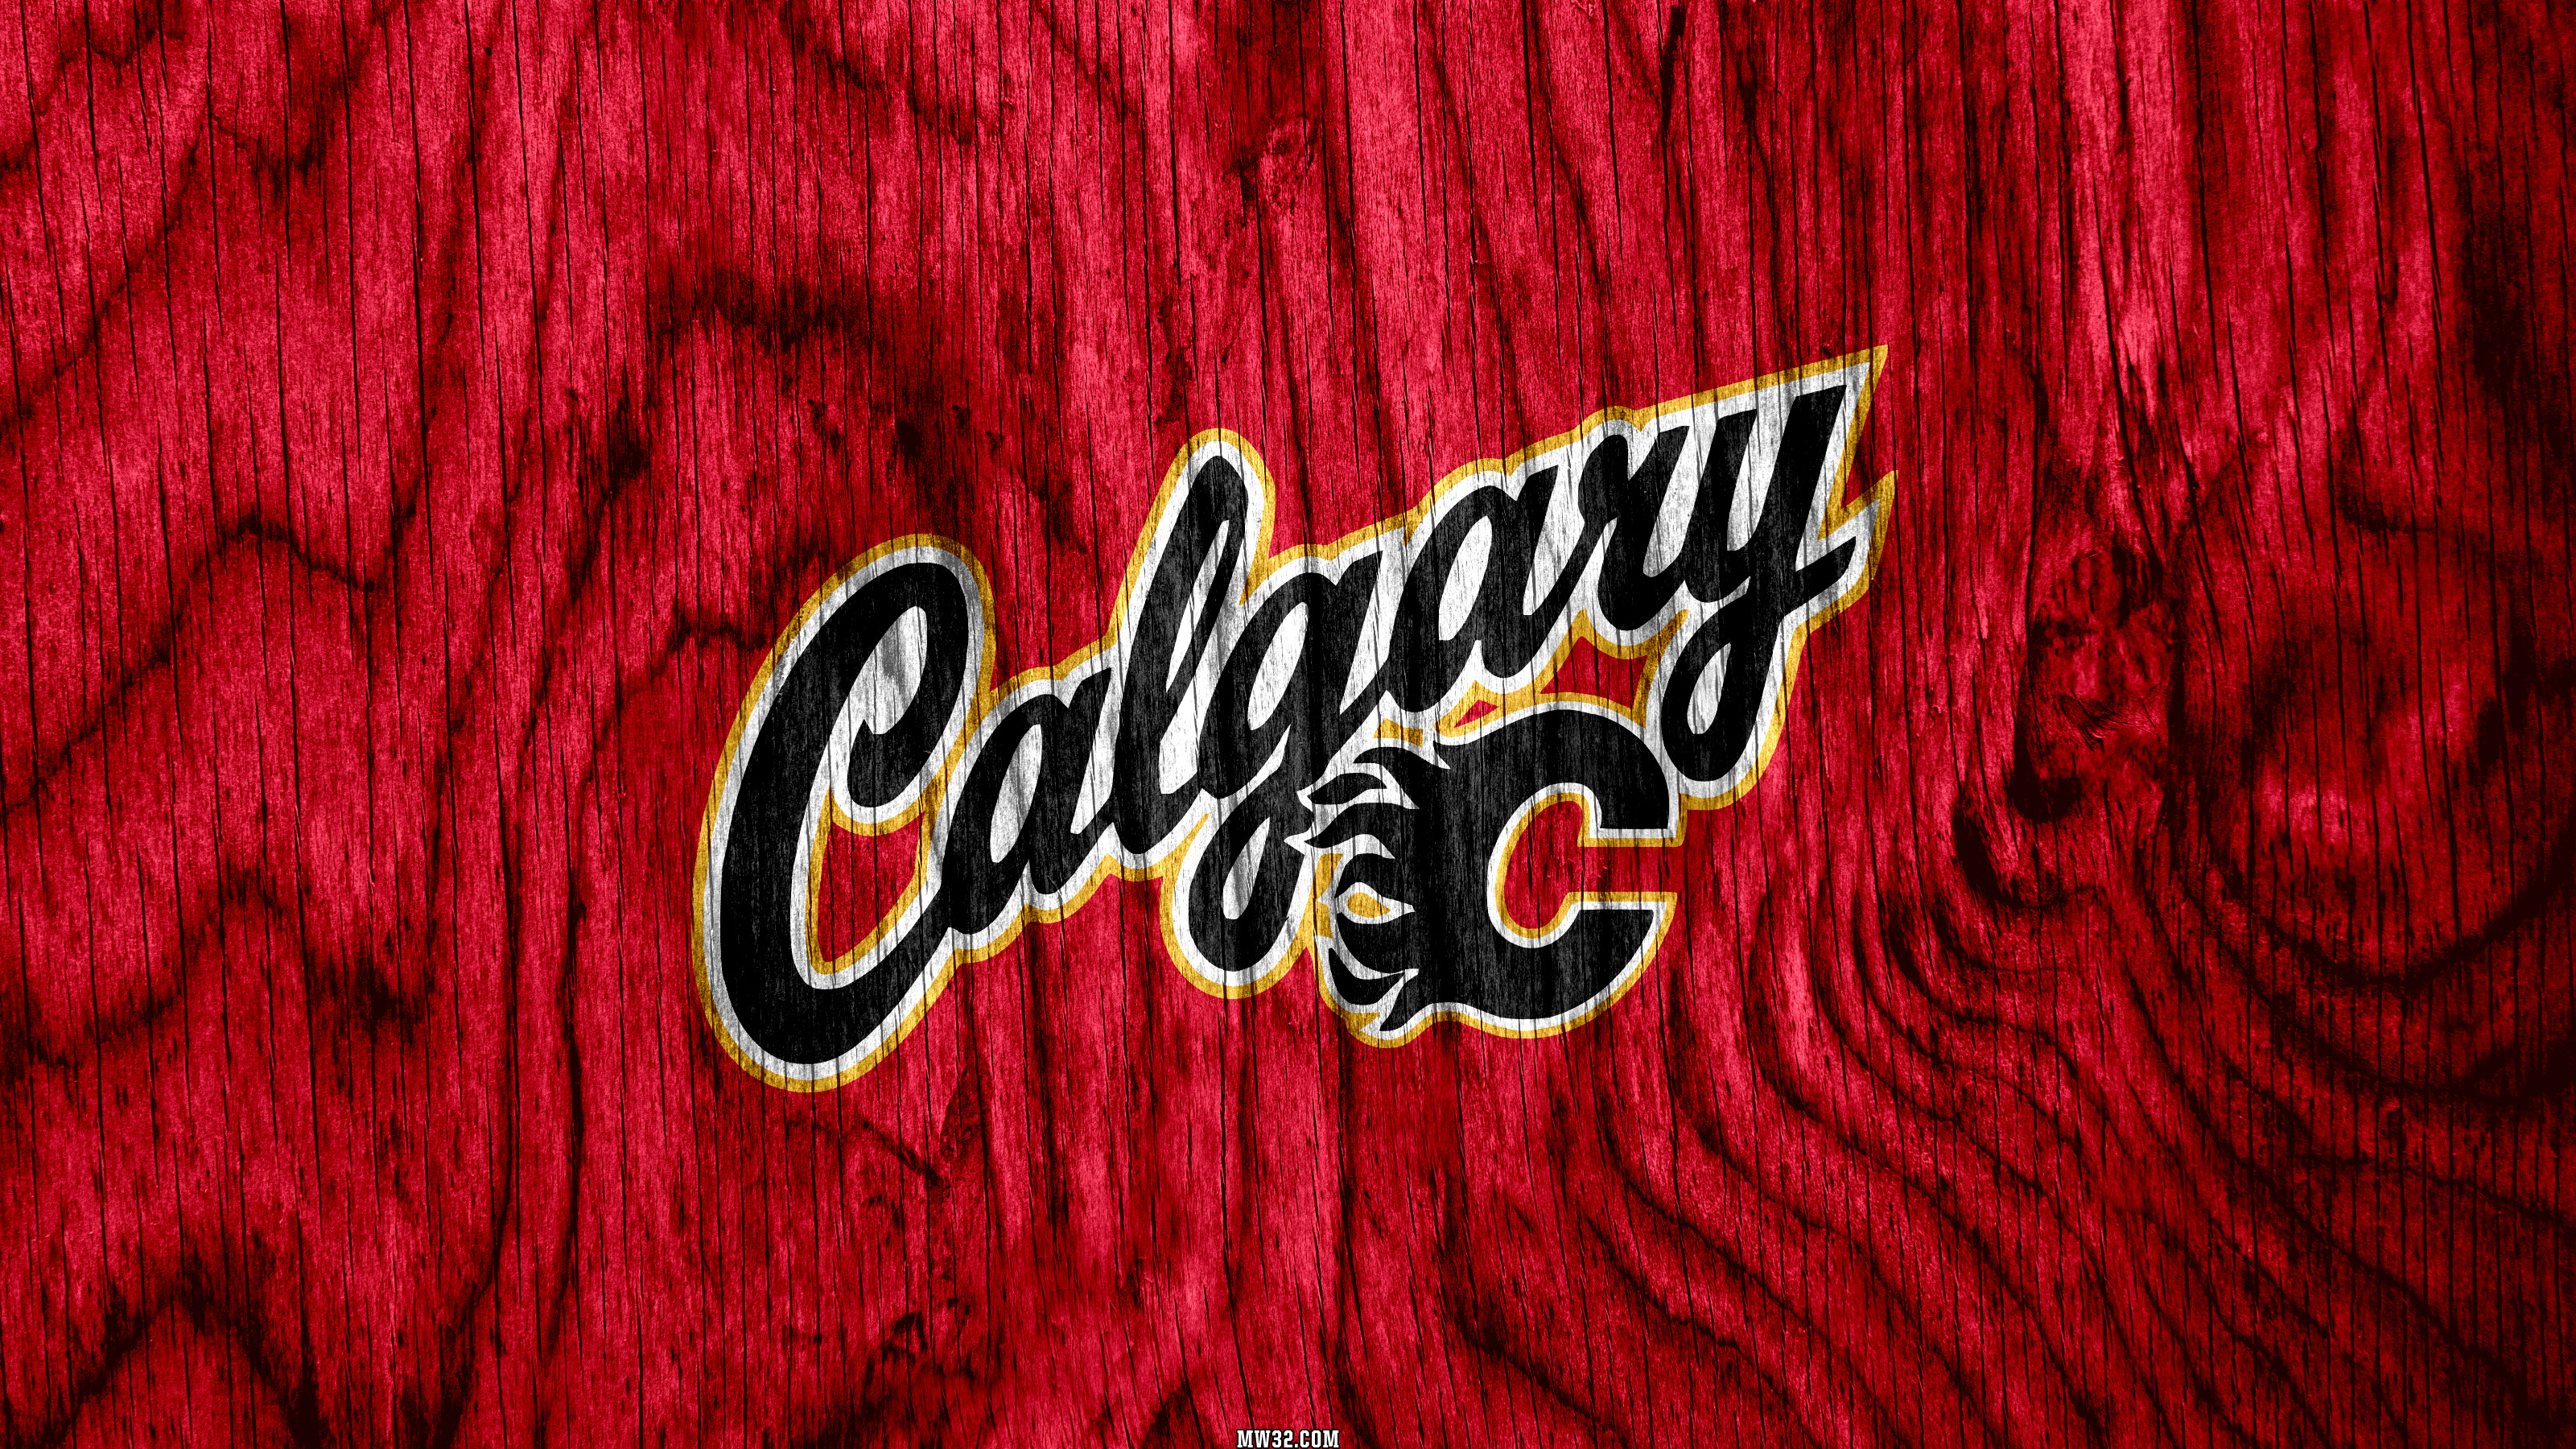 OT - New Wallpaper Style - Page 3 - Calgarypuck Forums - The ...